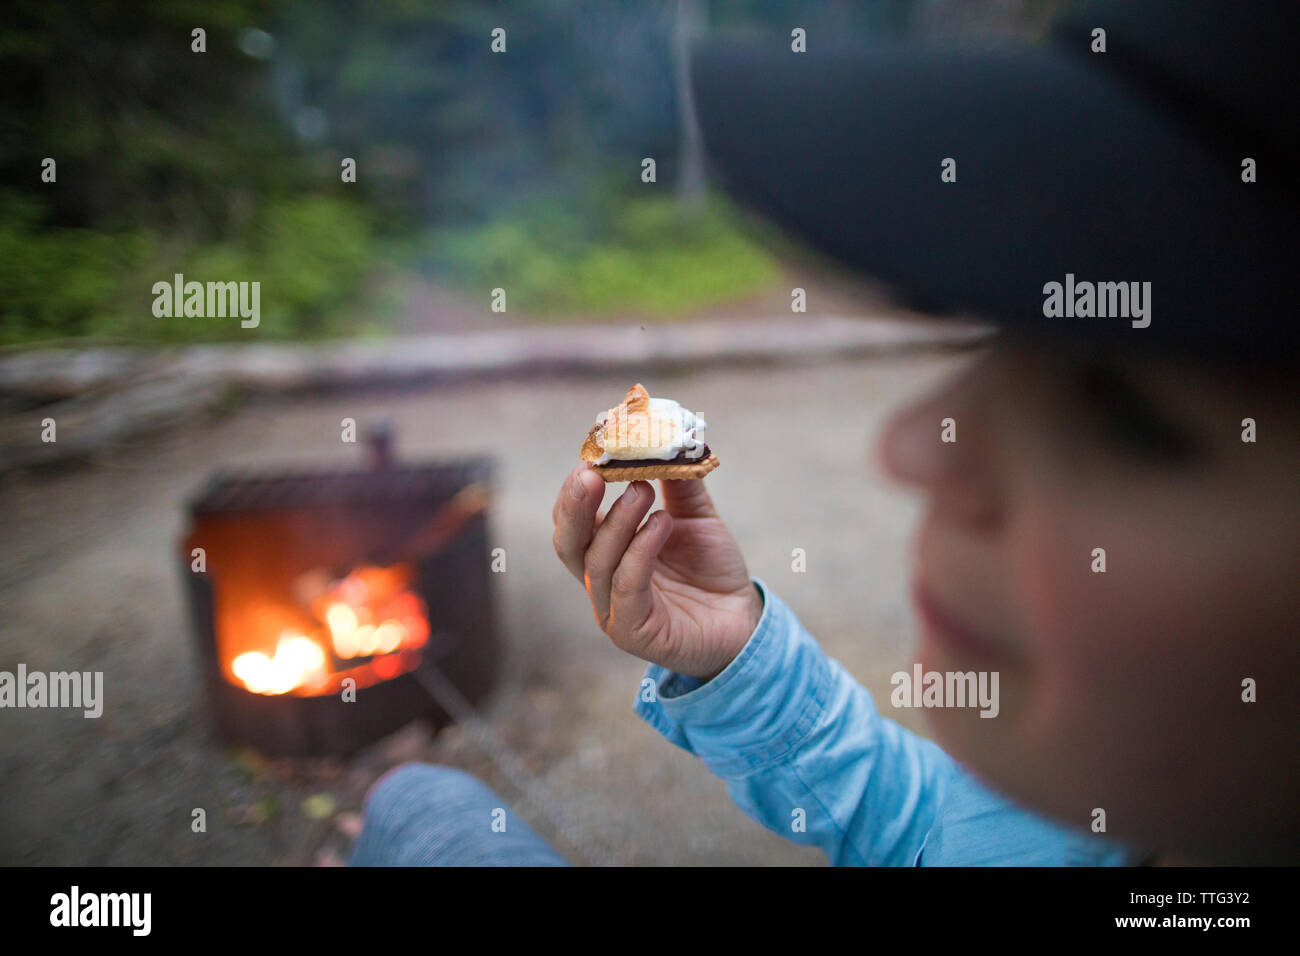 Young woman eating s'mores next to a campfire. Stock Photo